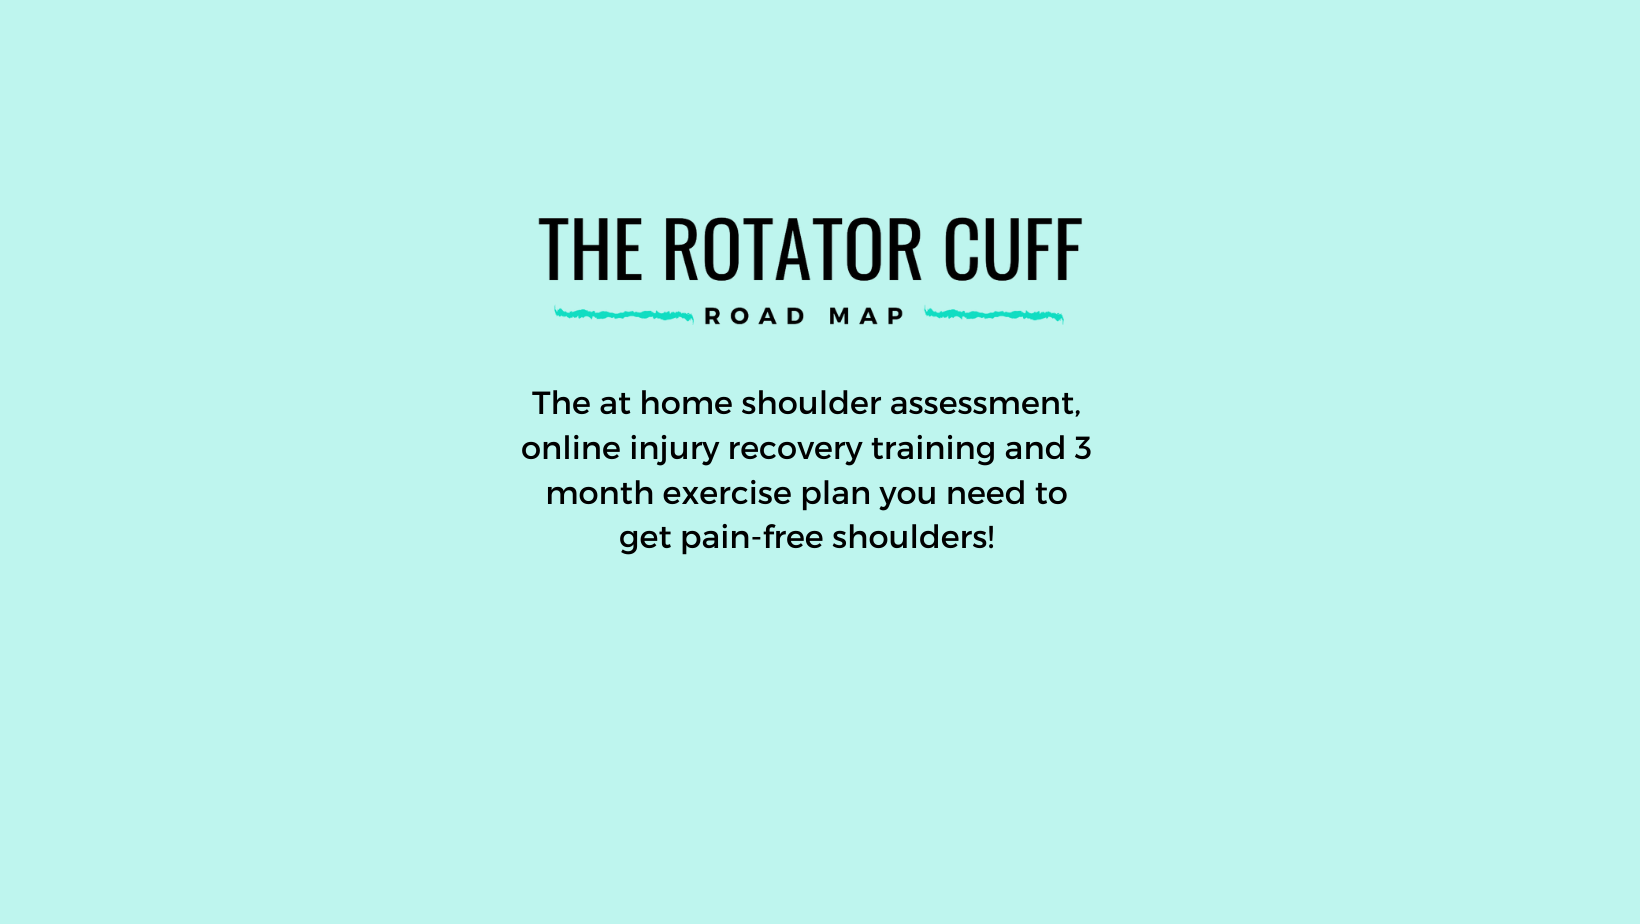 The rotator cuff roadmap. The at home shoulder assessment, online injury recovery training and 3 month treatment plan you need to get pain-free shoulders!